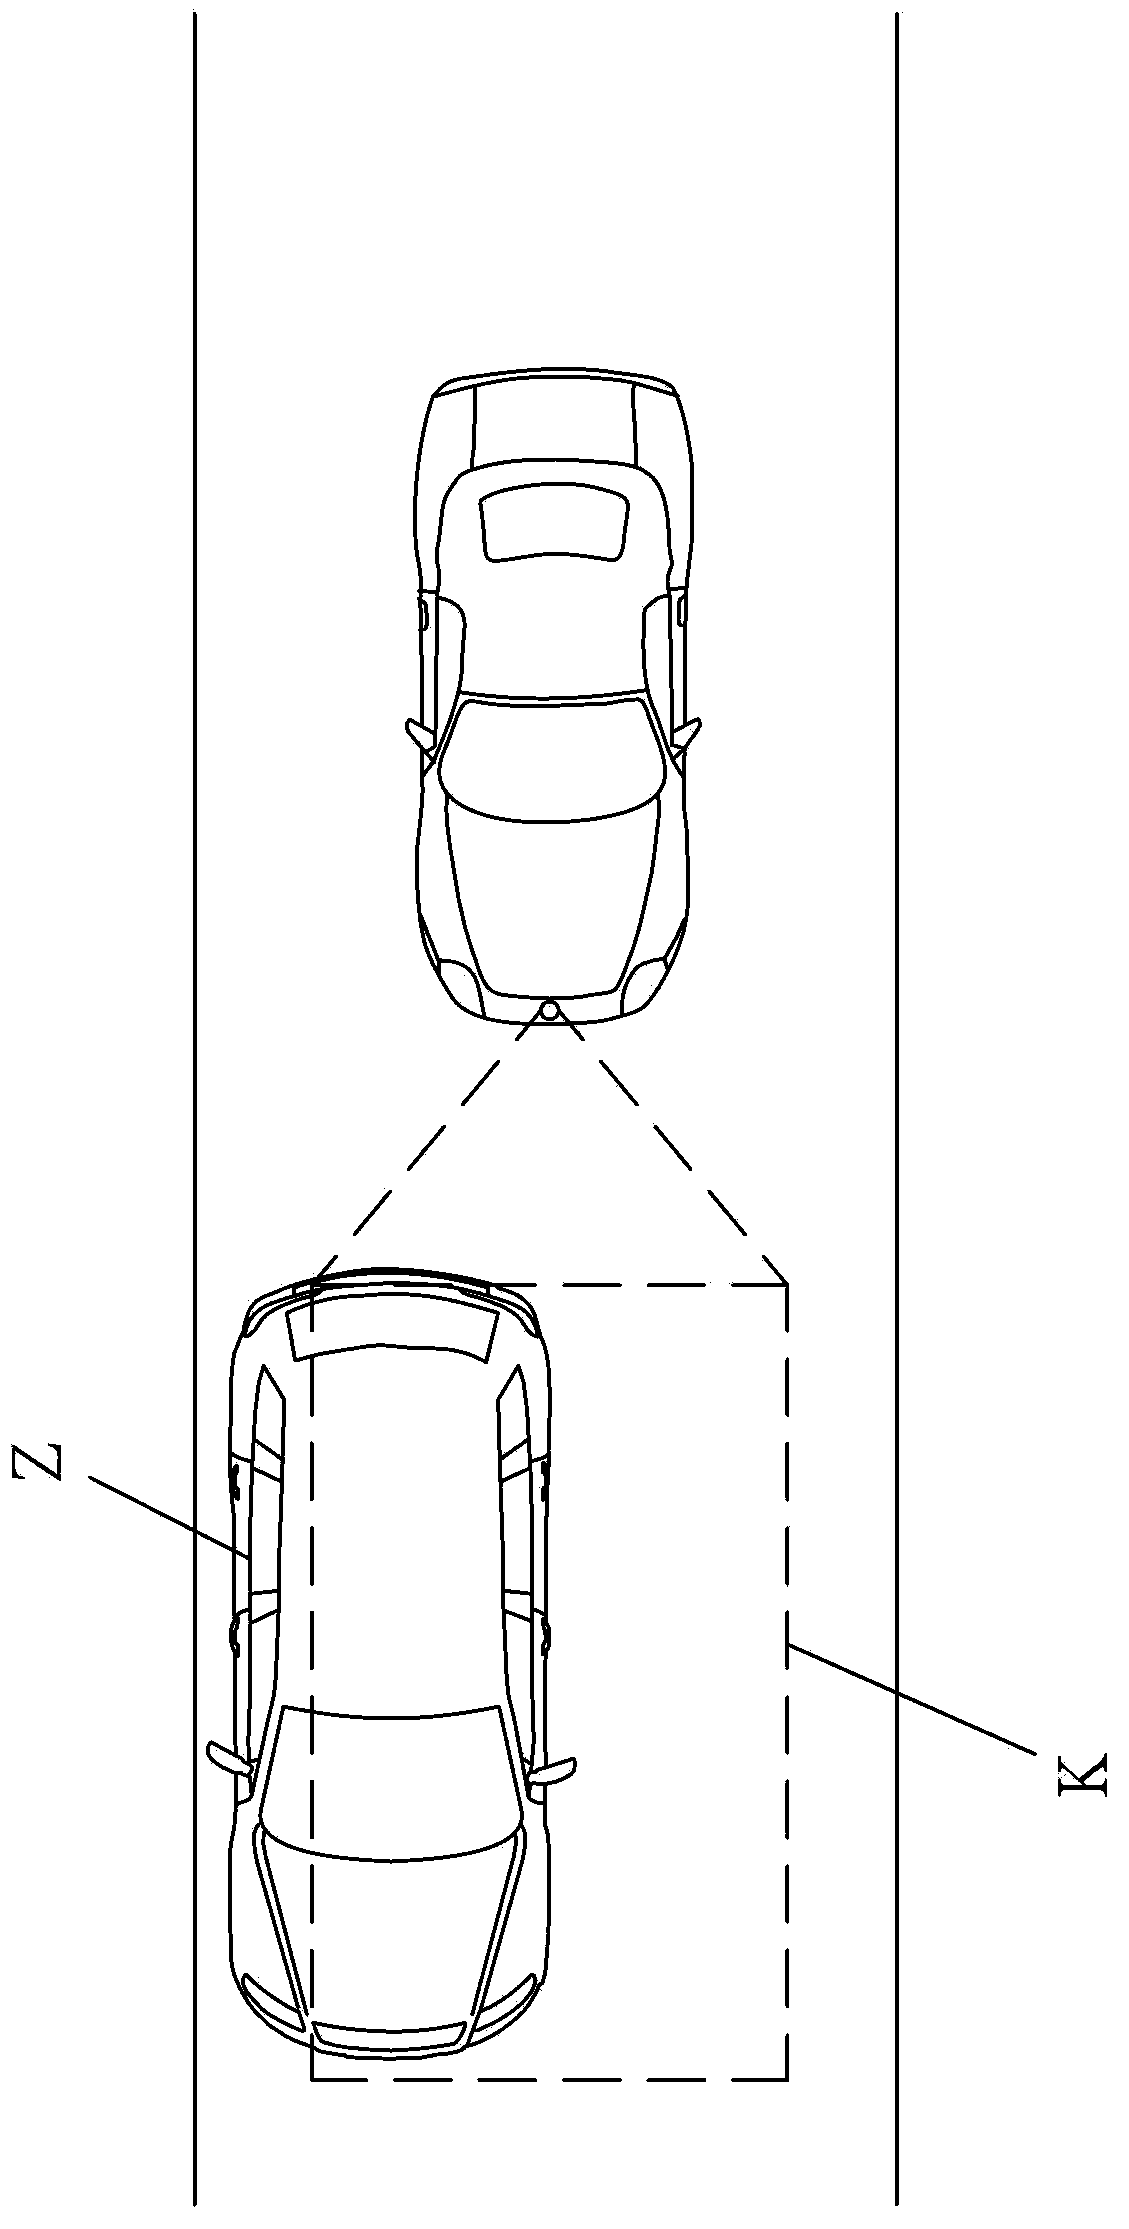 Omnidirectional vehicle security system and omnidirectional vehicle security method using same